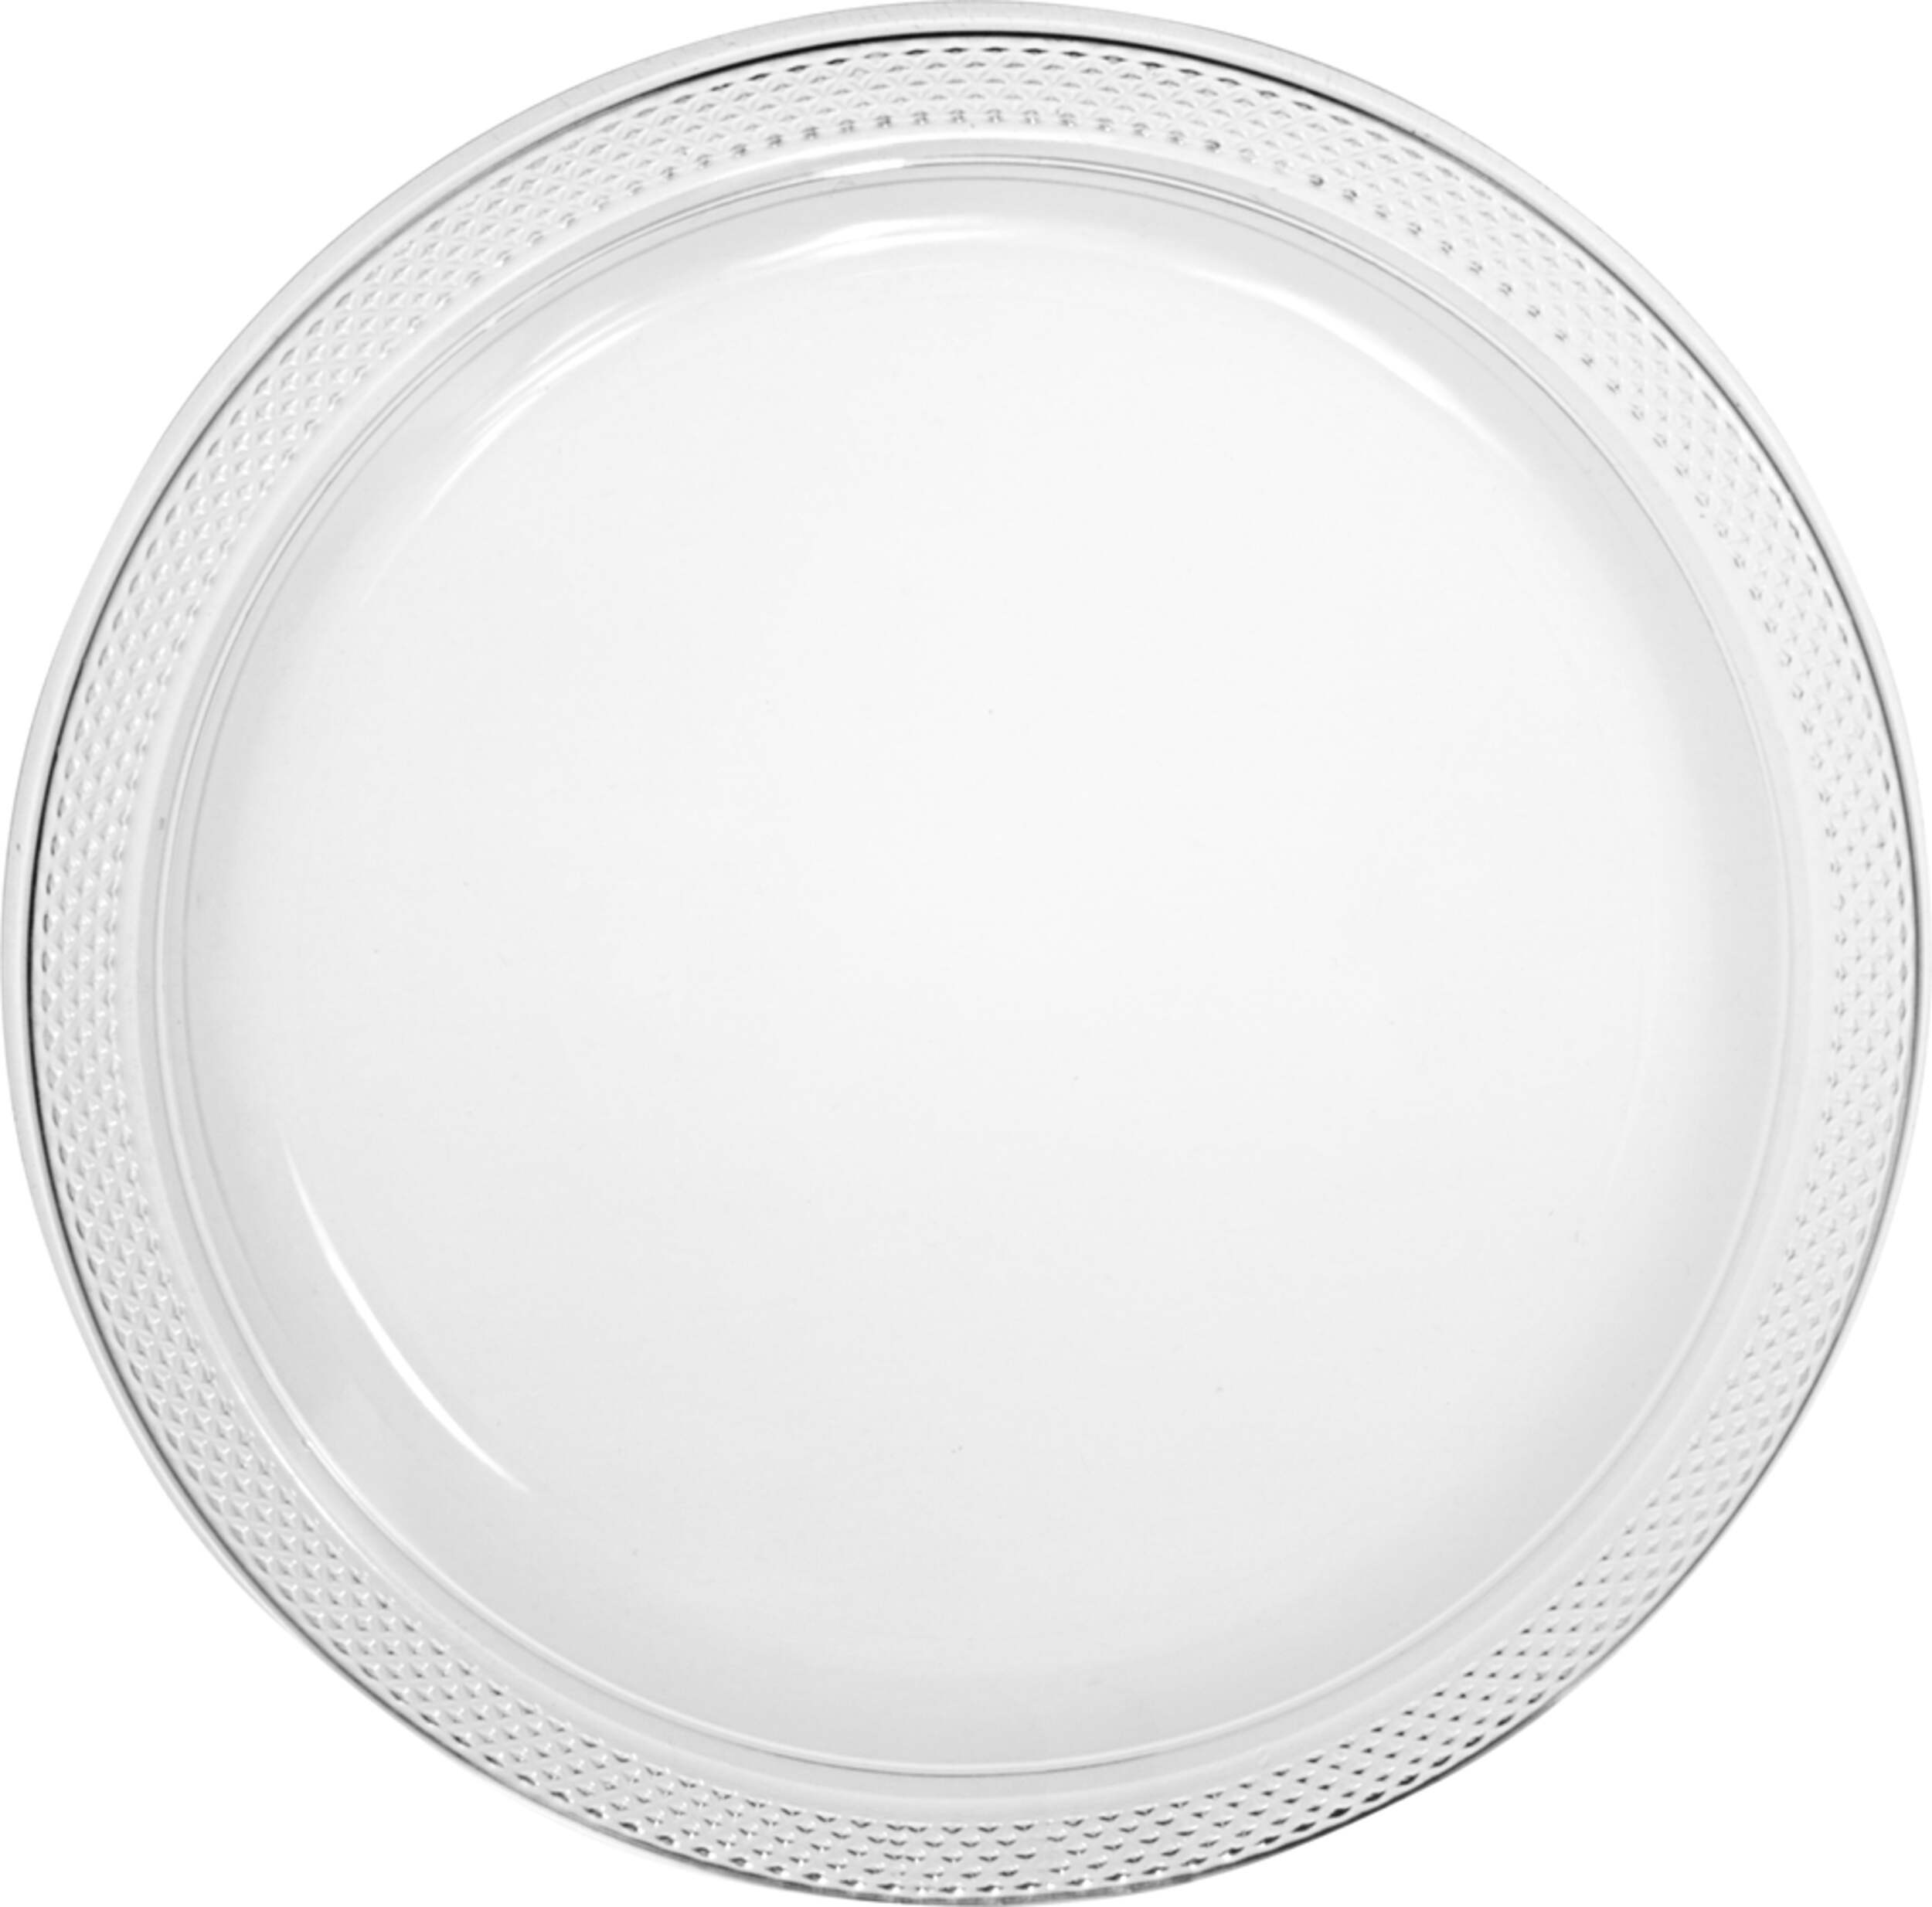 Clear Plastic Dinner Plates 20ct 1ad8843e 19bd 48f8 B981 4a9de806ff09 ?imdensity=1&imwidth=640&impolicy=gZoom